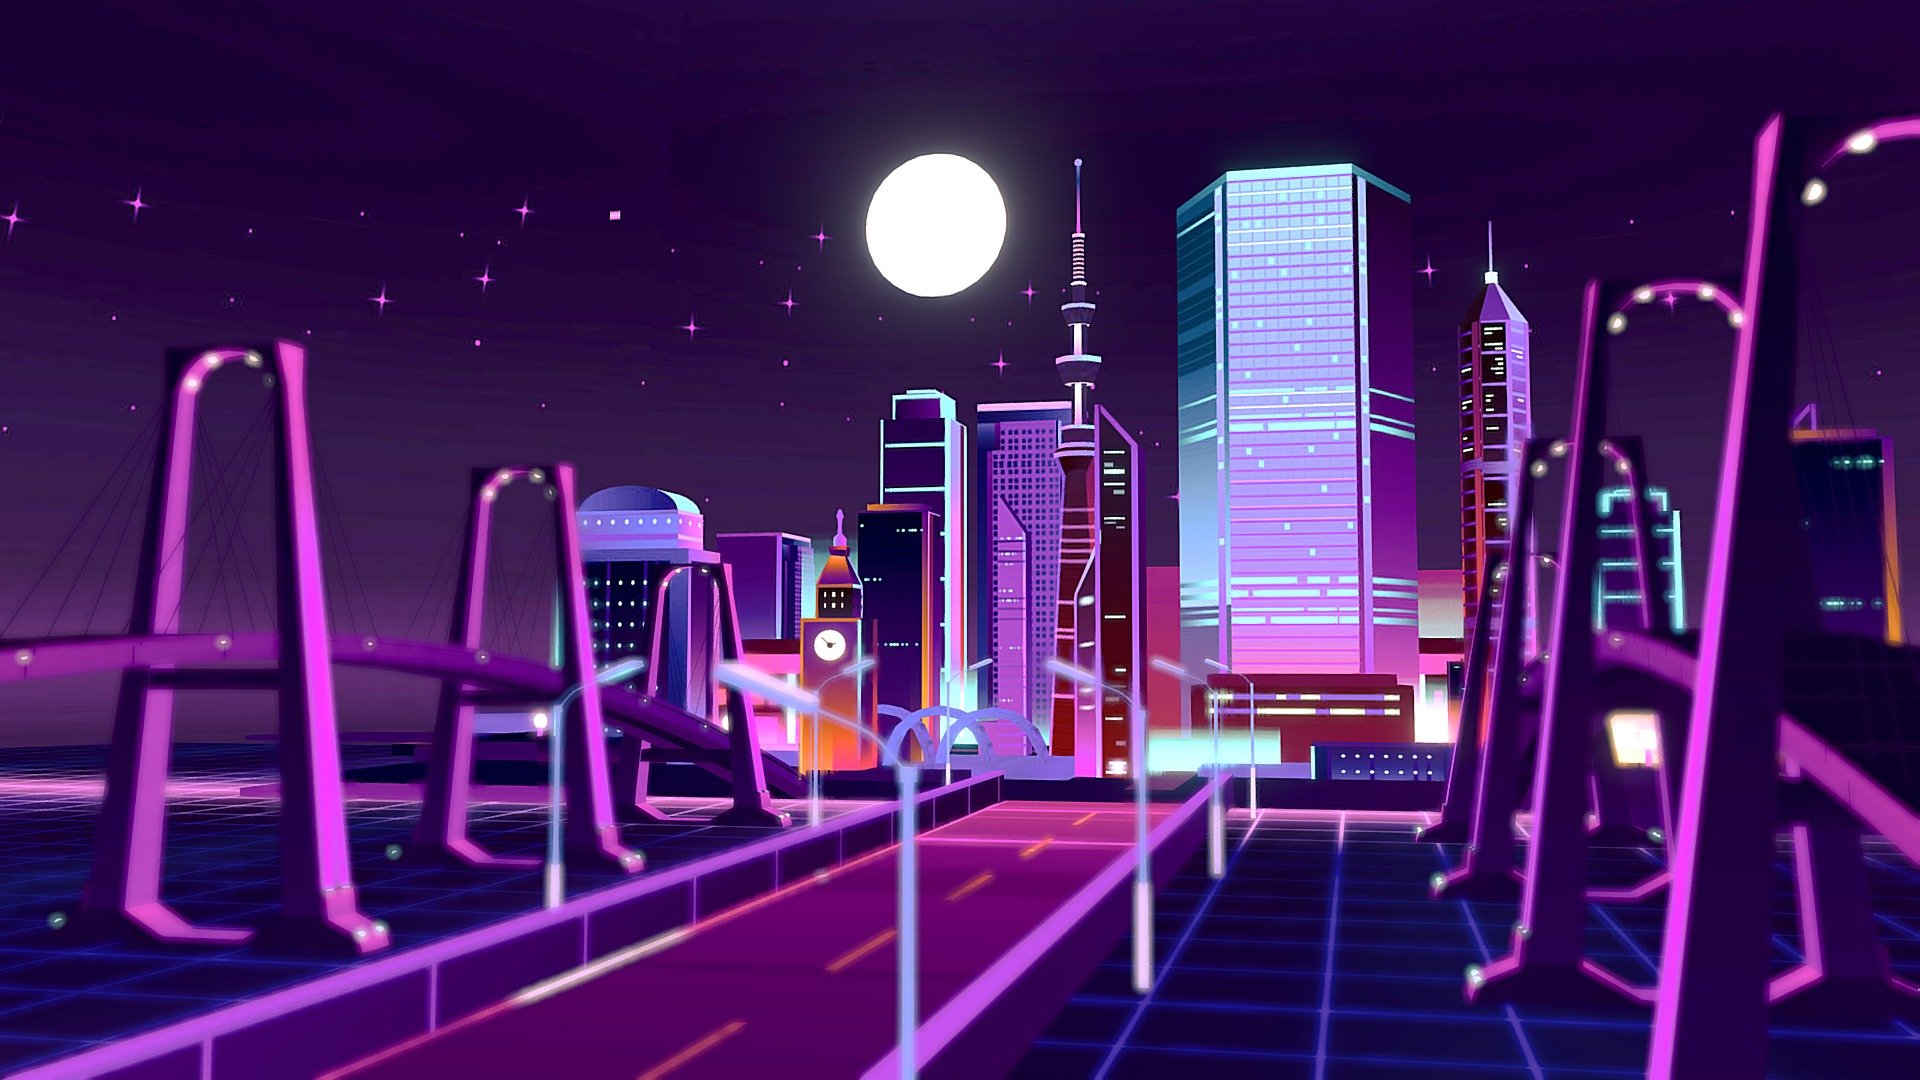 CYBER PUNK NIGHT CITY LOWPOLY LIFE BUILDINGS FBX - Buy Royalty Free 3D ...